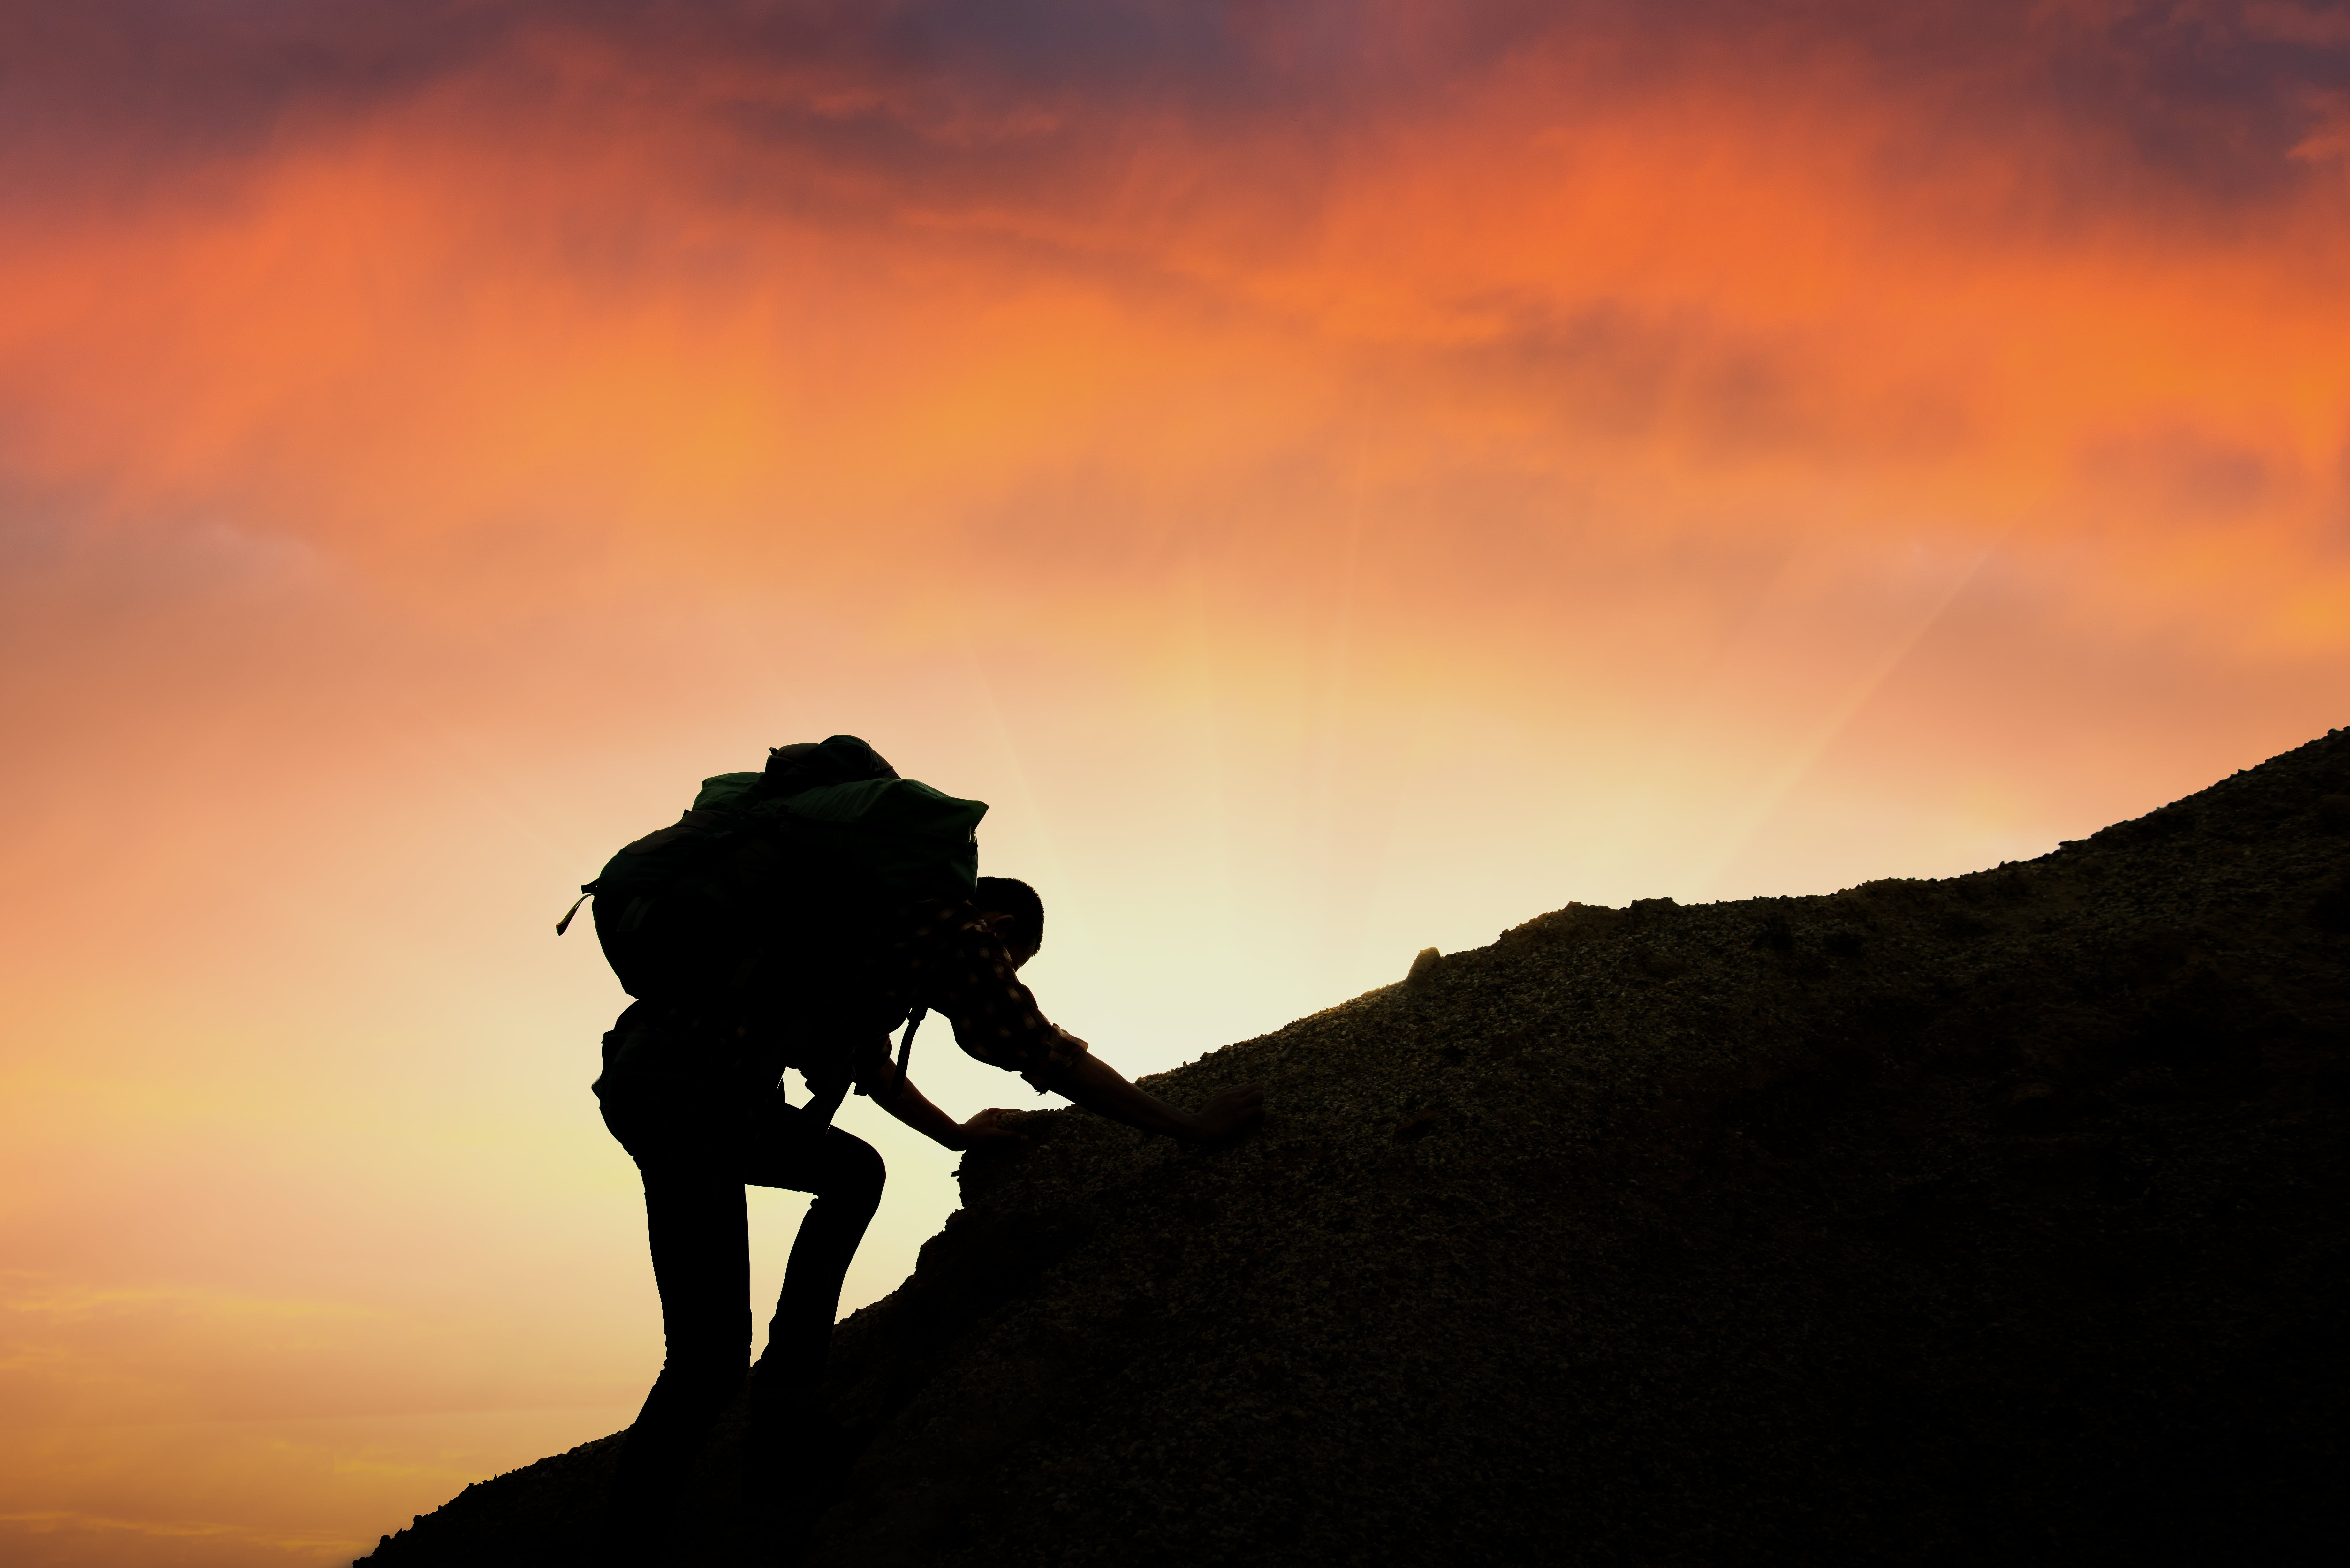 A person climbing a mountain with a large rucksack on their back silhouetted against the sunset